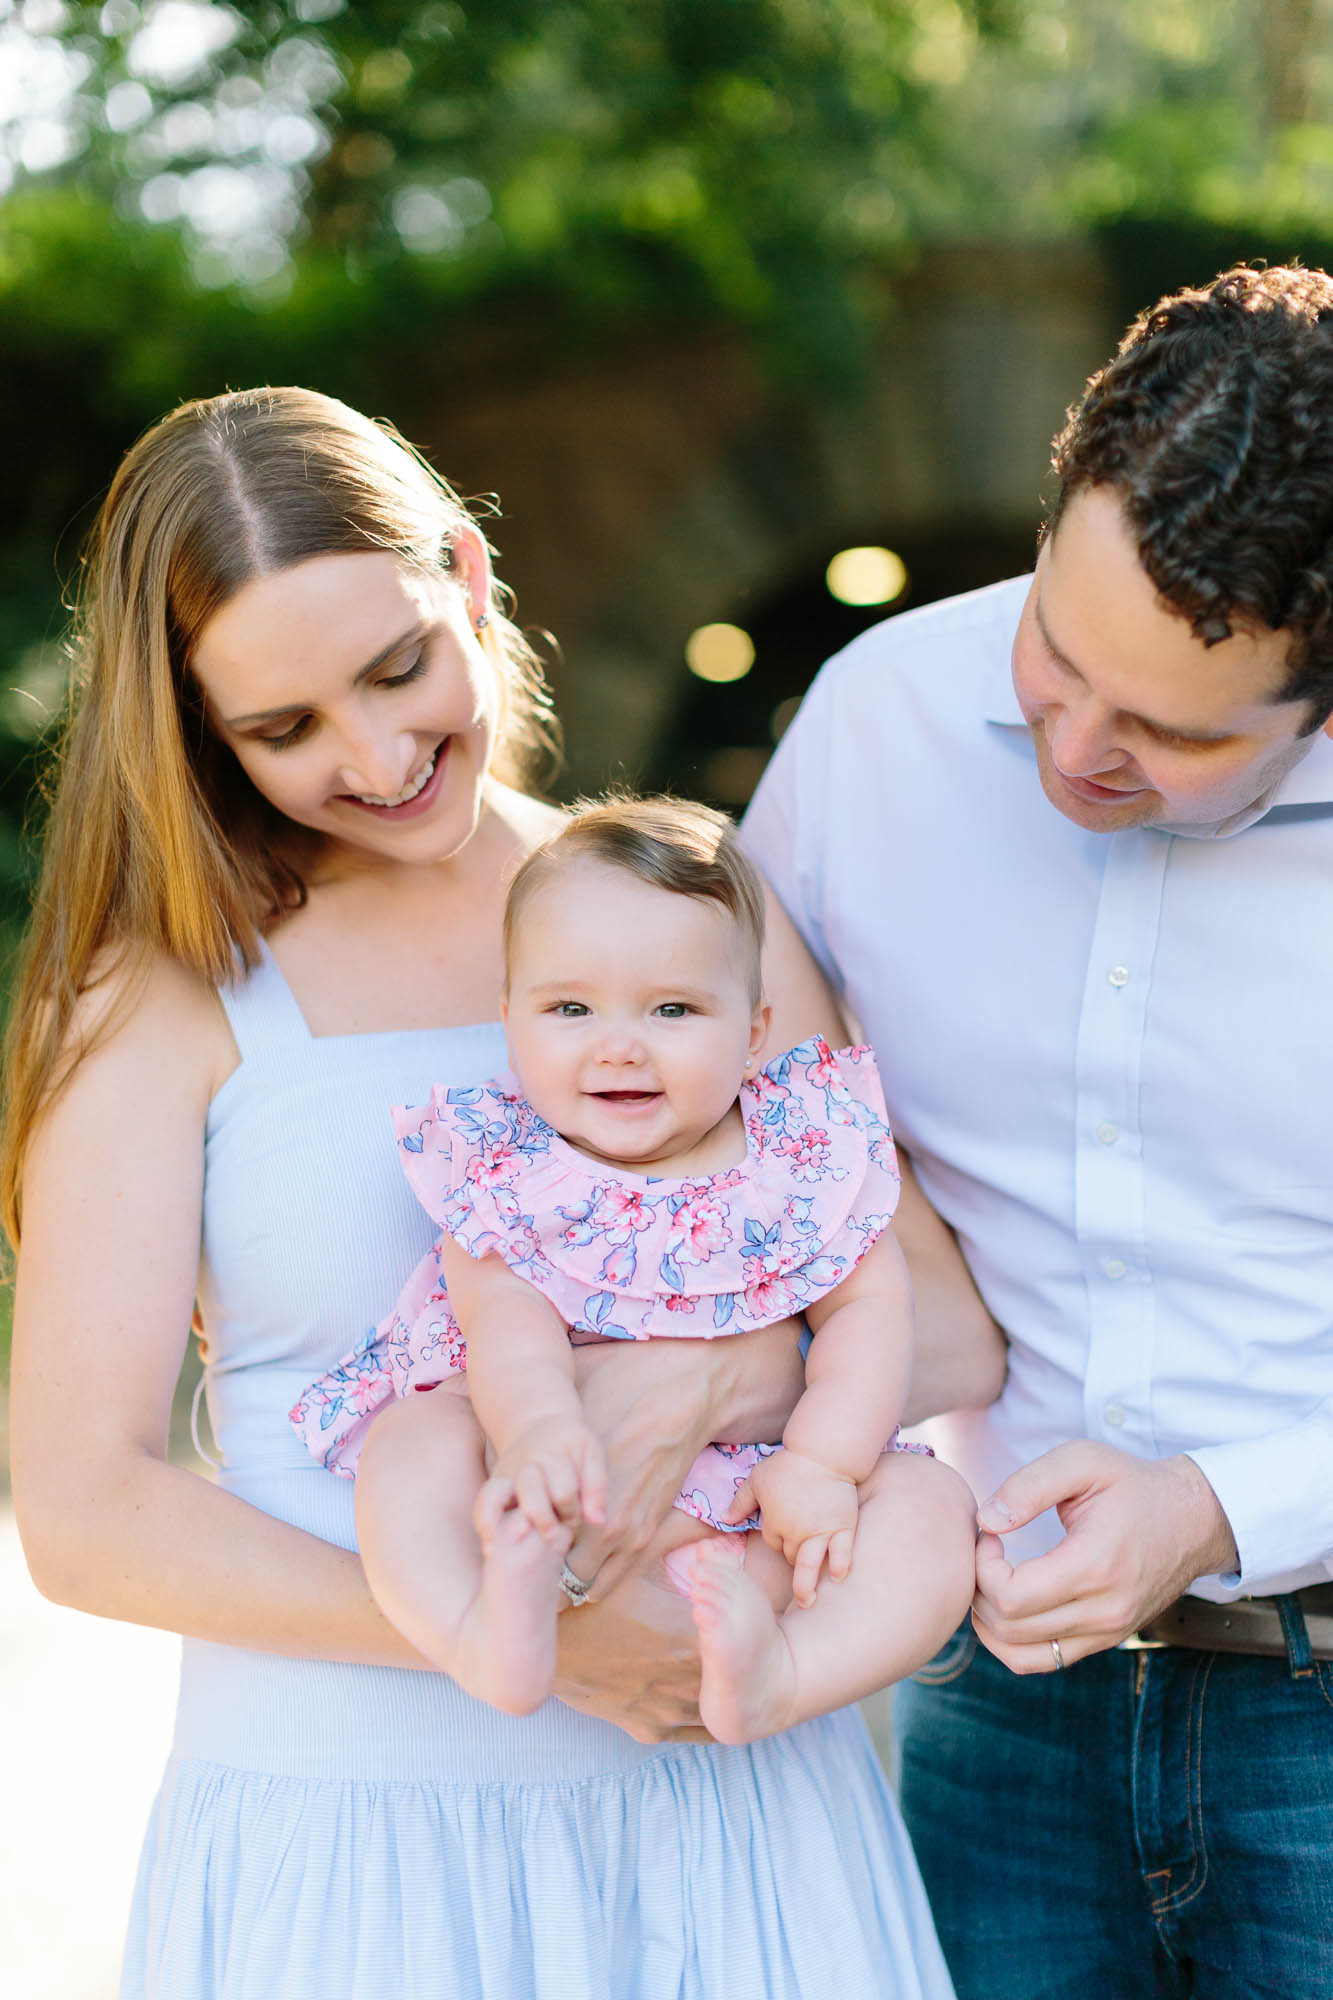 Morillos family in Central Park pictured by top NYC family photographer, Jacqueline Clair